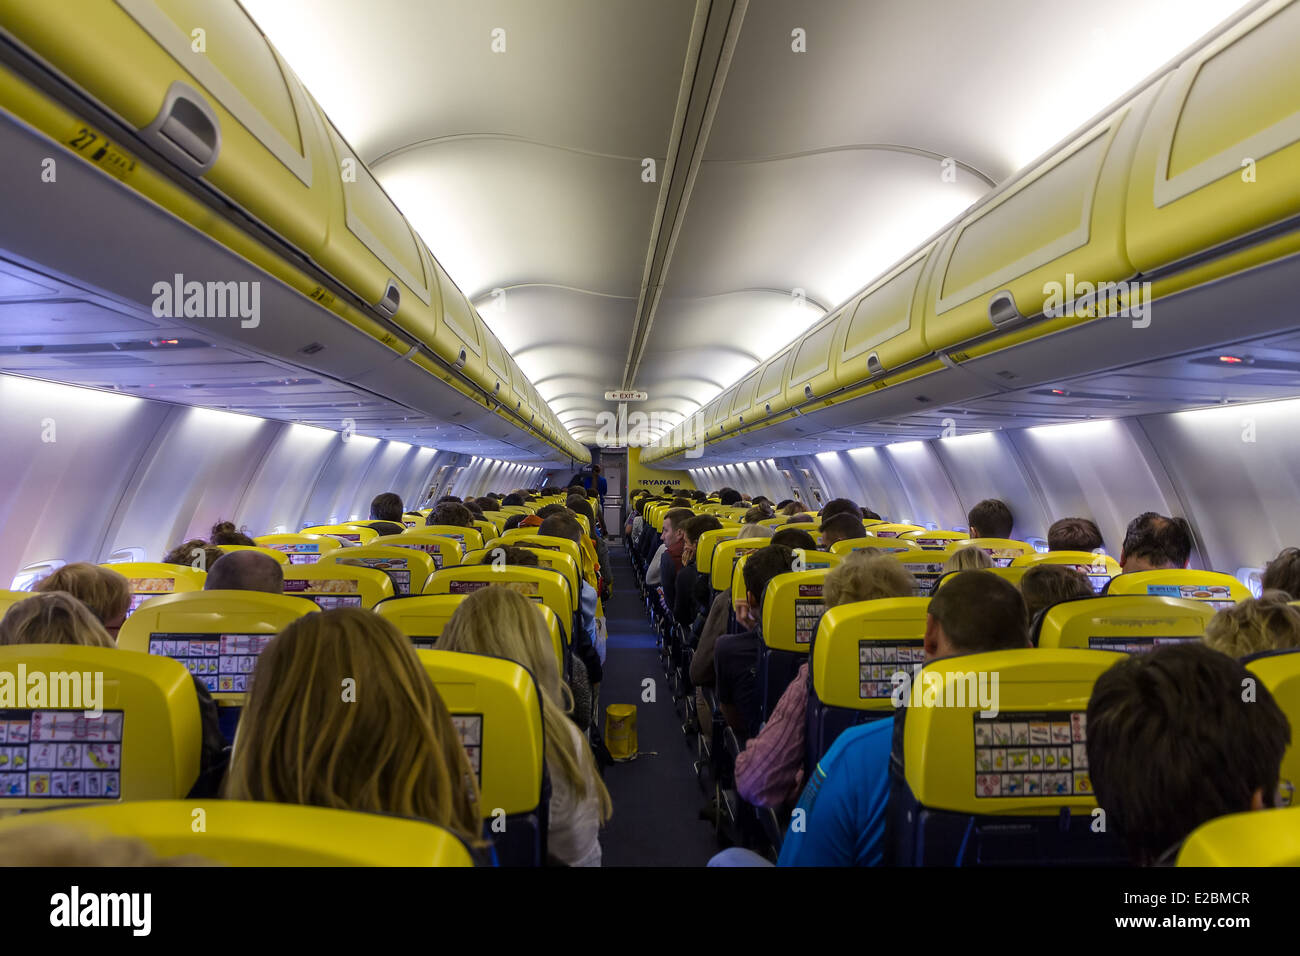 Passenger compartment of the aircraft company Ryanair on 2 may 2014. Ryanair is one of the largest low-cost European airline by Stock Photo